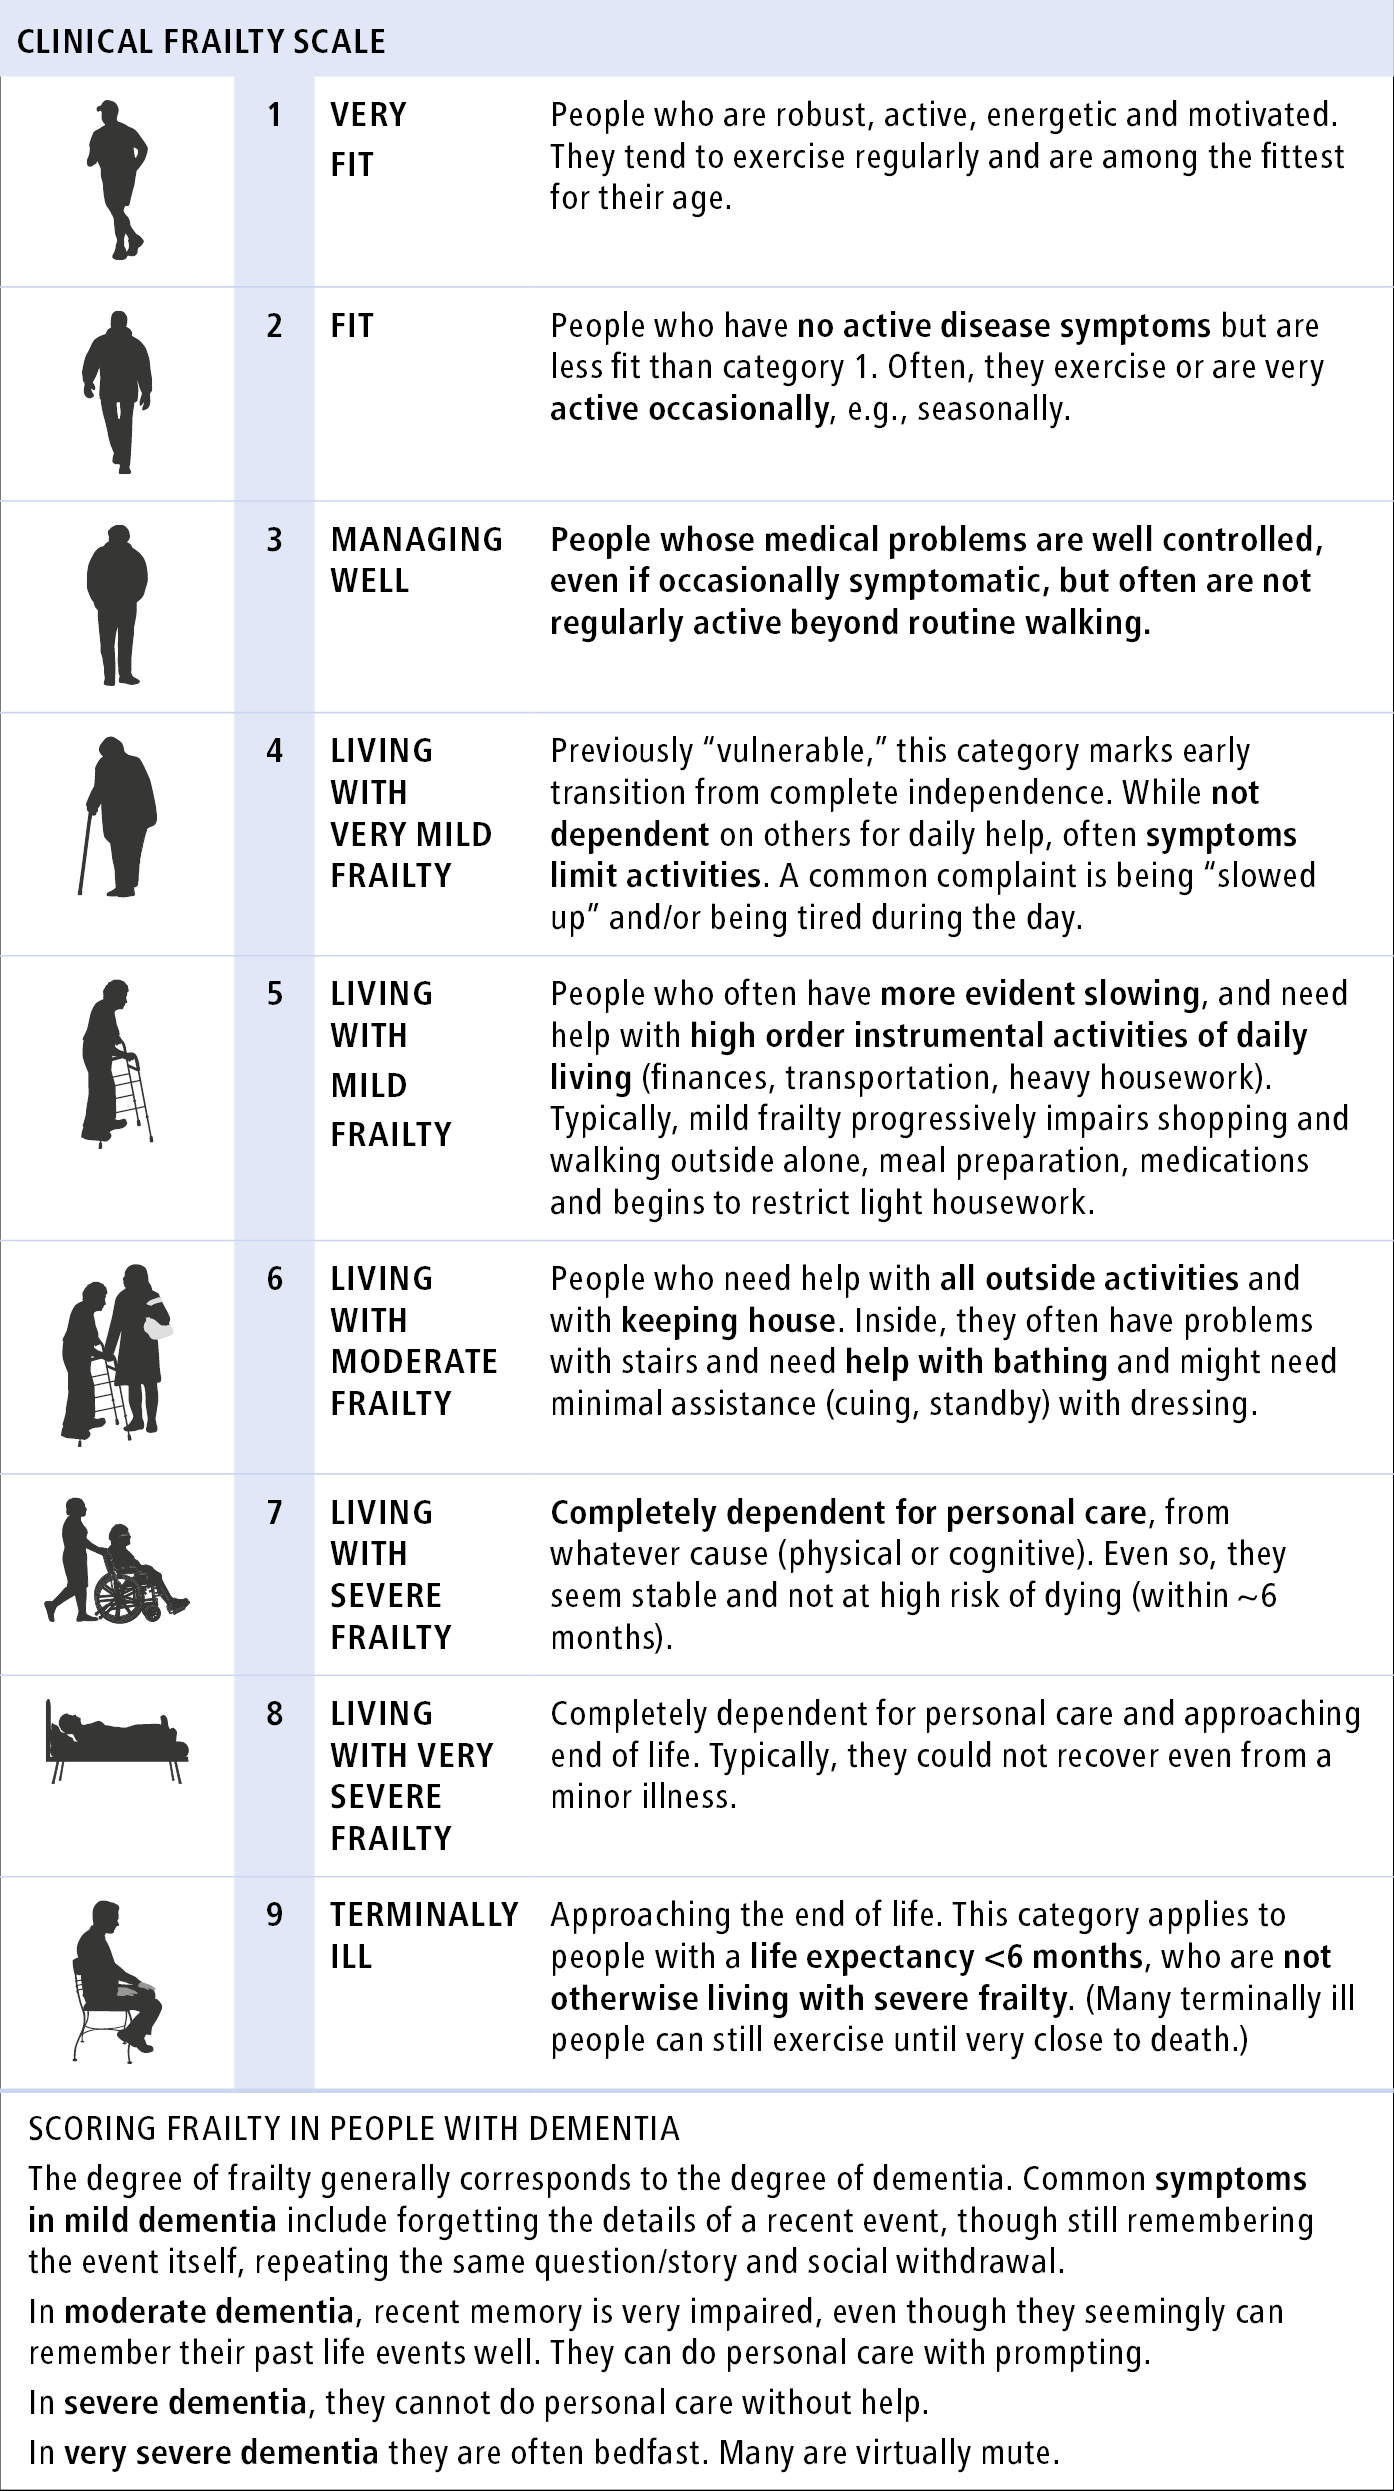 Figure 031_7673.  Clinical Frailty Scale (CFS). The degree of frailty is based on an overall fitness summary and requires clinical judgement. CFS is not validated in younger patients or those with lifelong or single-system disability.  Source: Rockwood K, Song X, MacKnight C,   et al.     A global clinical measure of fitness and frailty in elderly people  .     CMAJ 2005;173:489-495; with permission from Dalhousie University, Geriatric Medicine Research.  